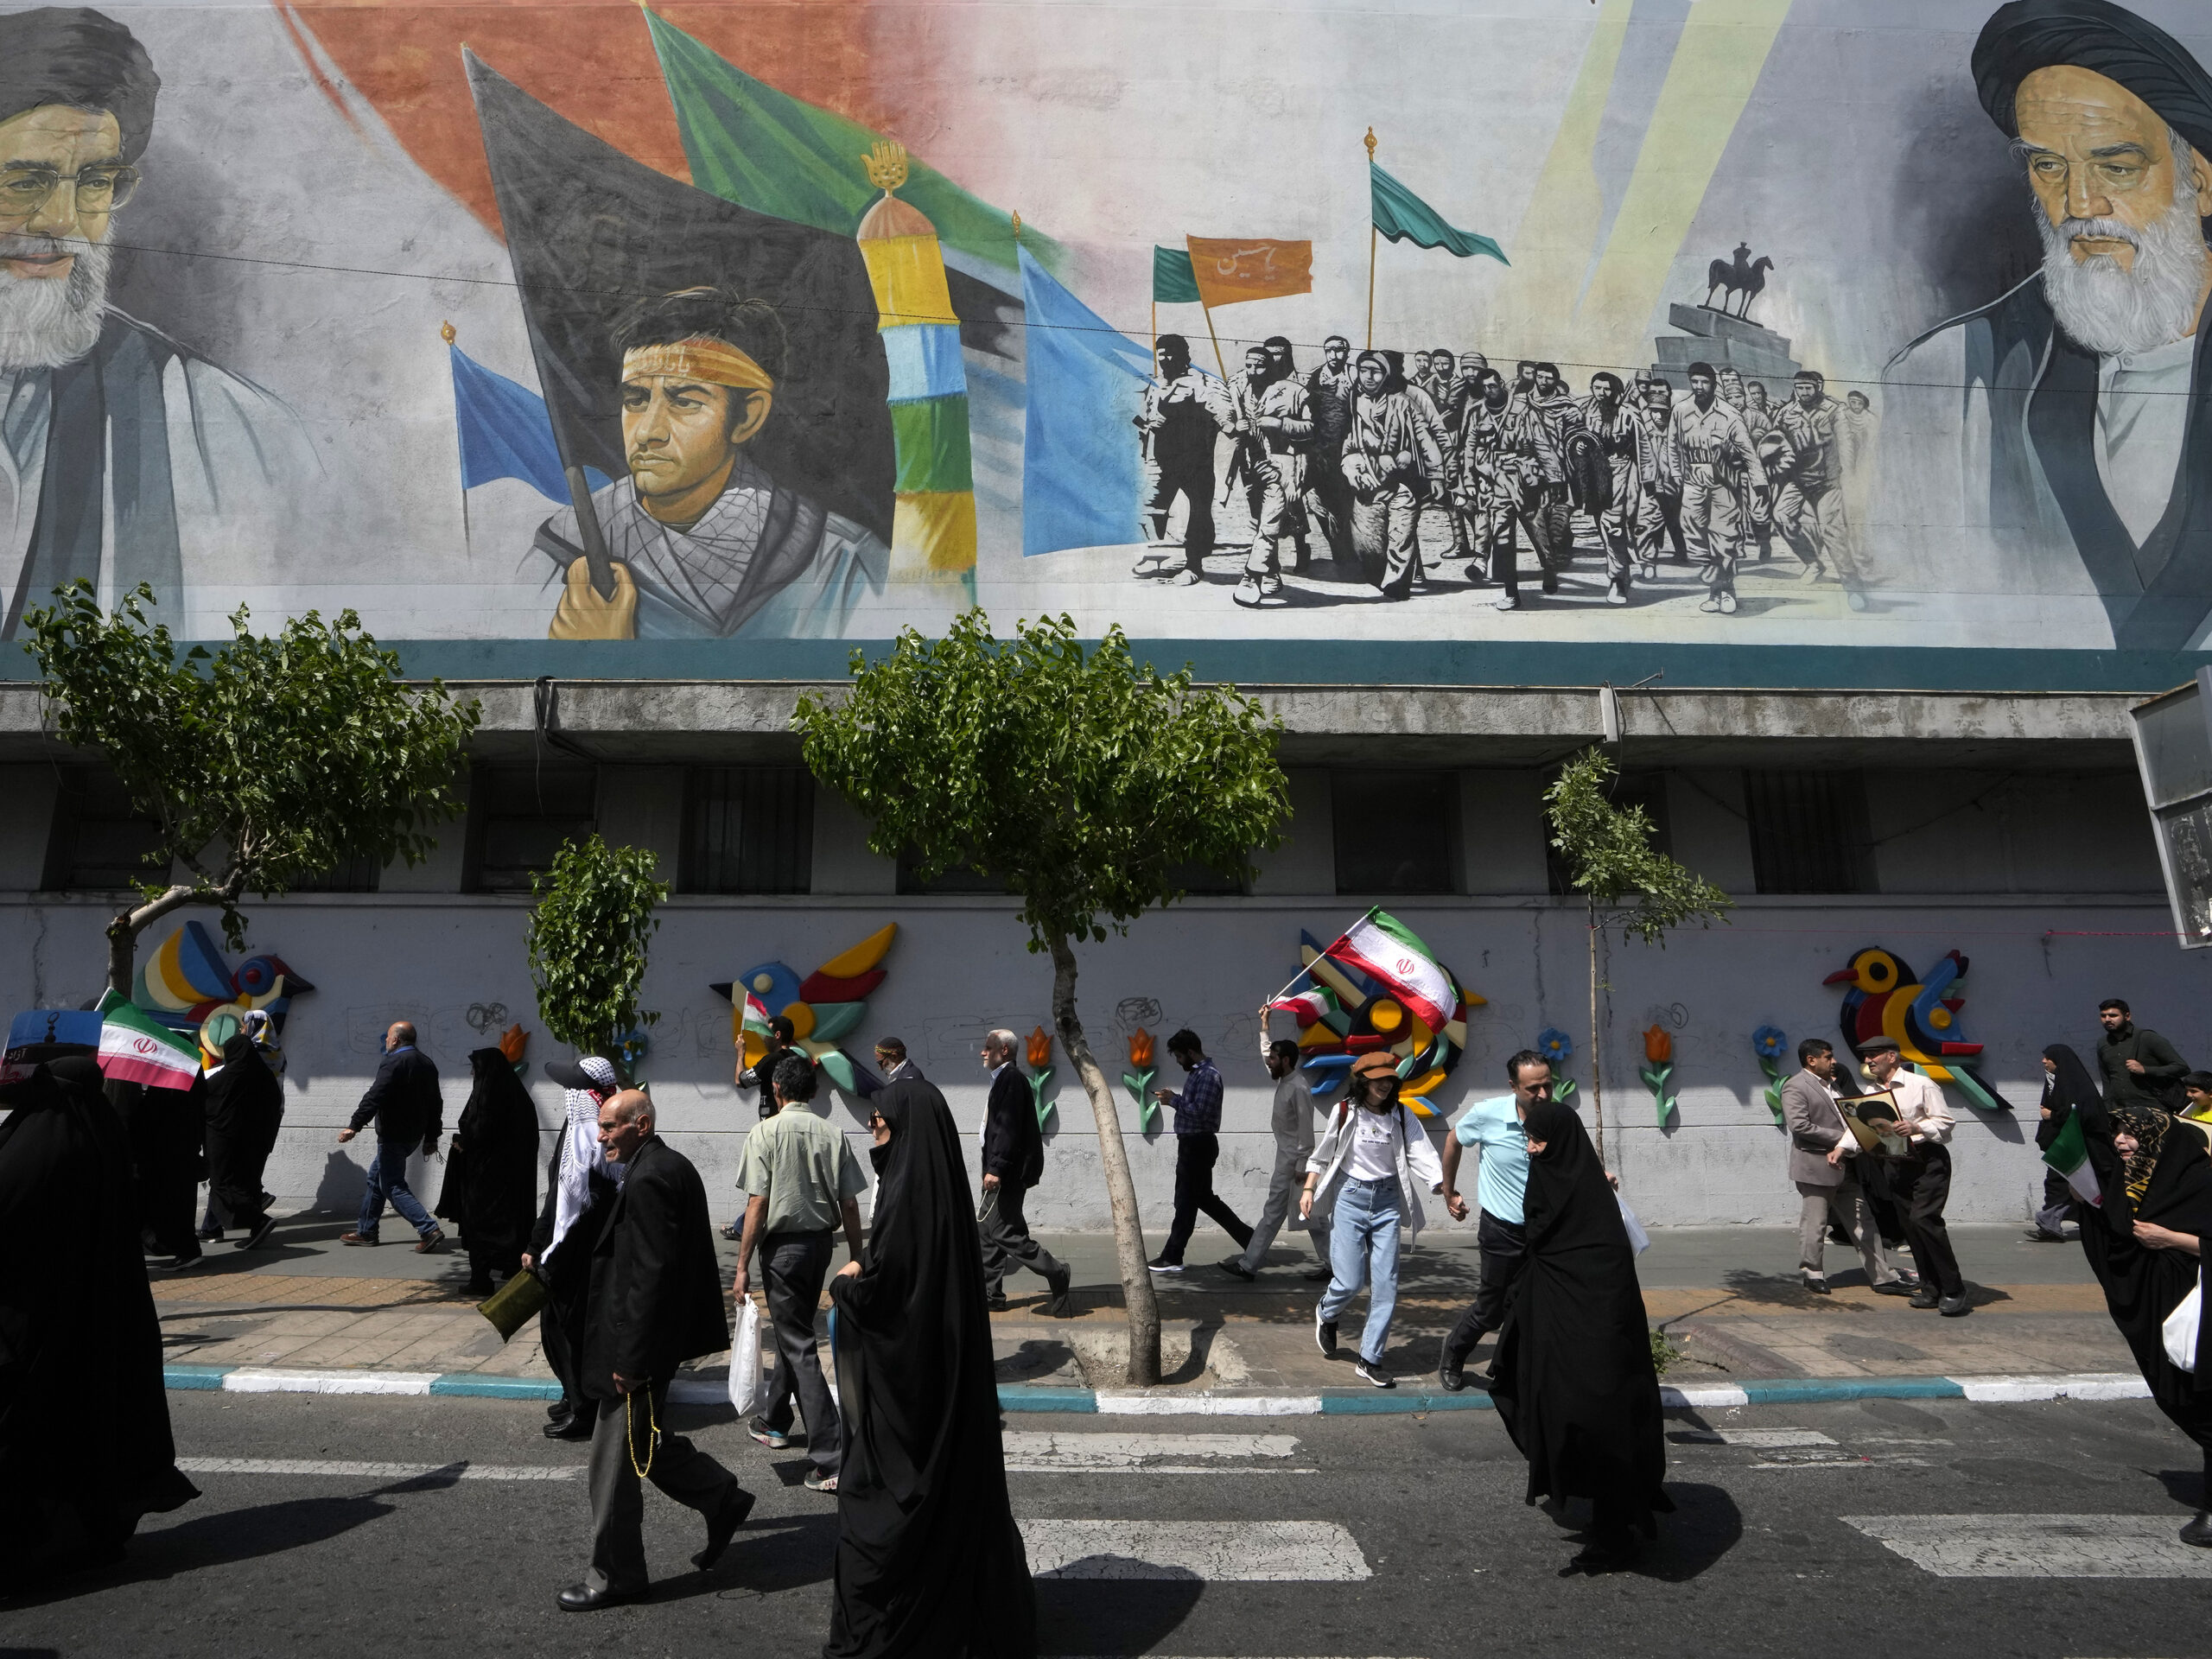 Iranian worshippers walk past a mural showing the late revolutionary founder Ayatollah Khomeini, right, Supreme Leader Ayatollah Ali Khamenei, left, and Basij paramilitary force, in an anti-Israeli gathering after their Friday prayer in Tehran, Iran, on Friday.